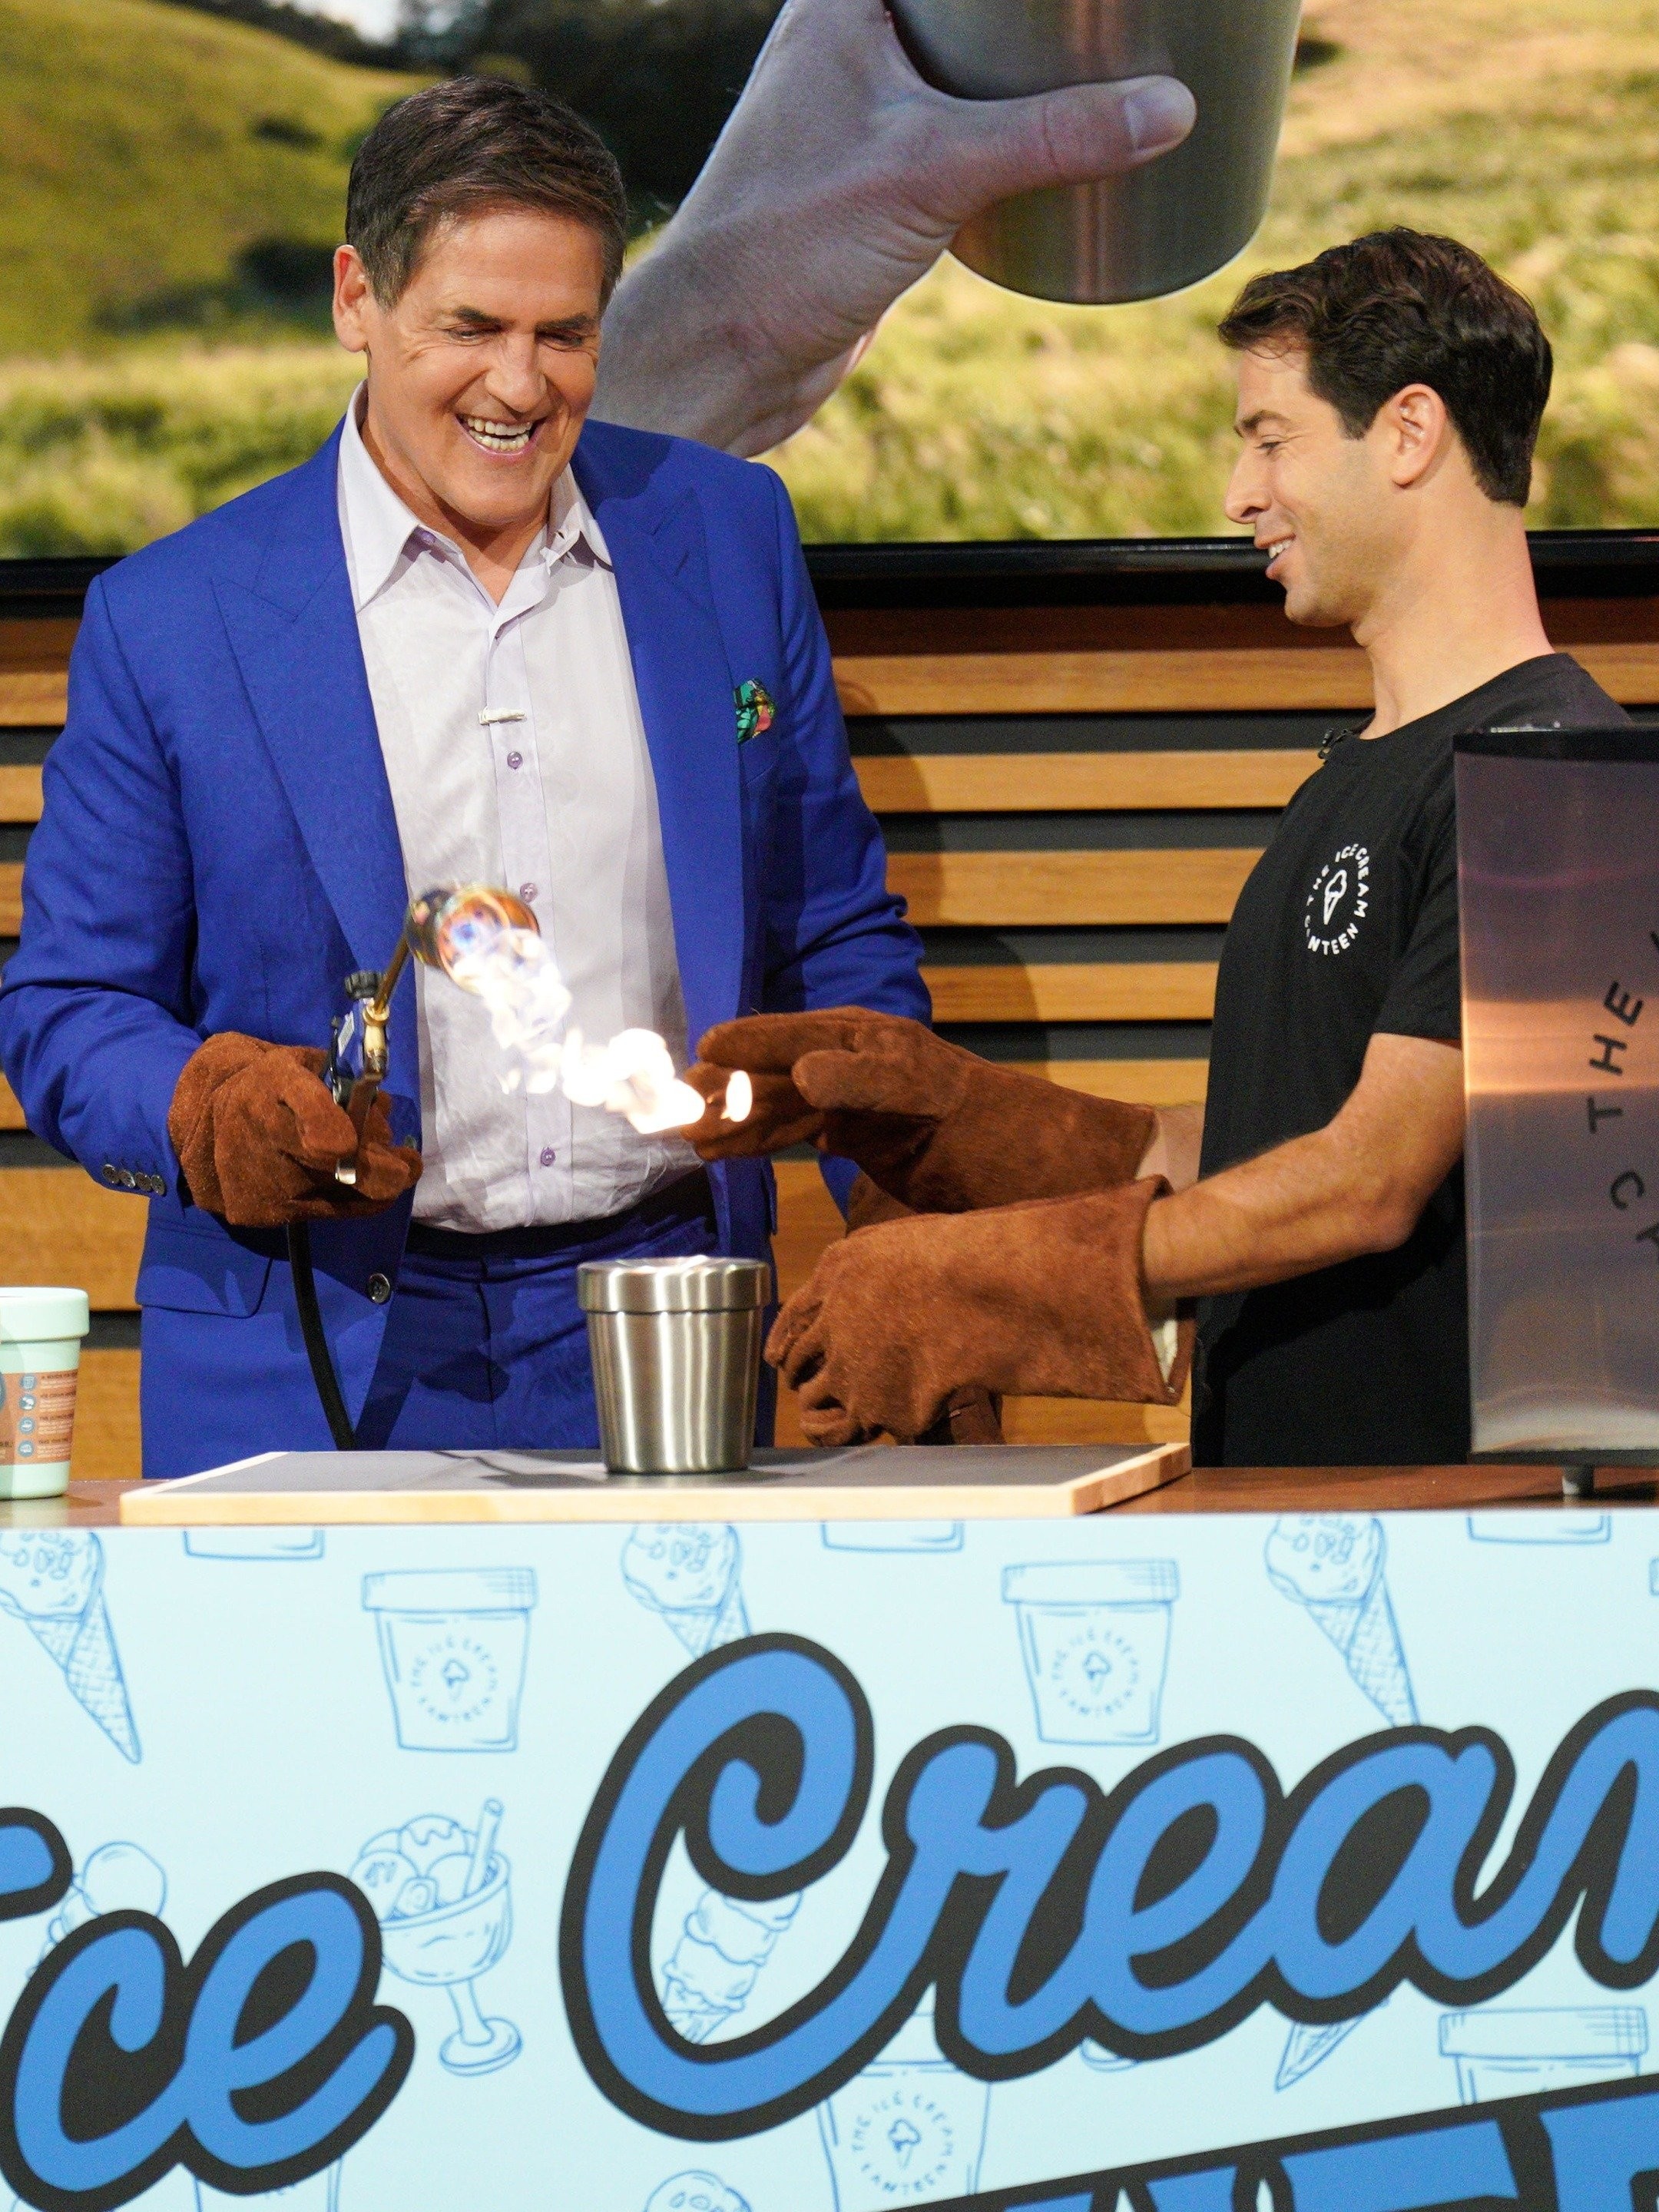 The Businesses and Products from Season 14, Episode 18 of Shark Tank